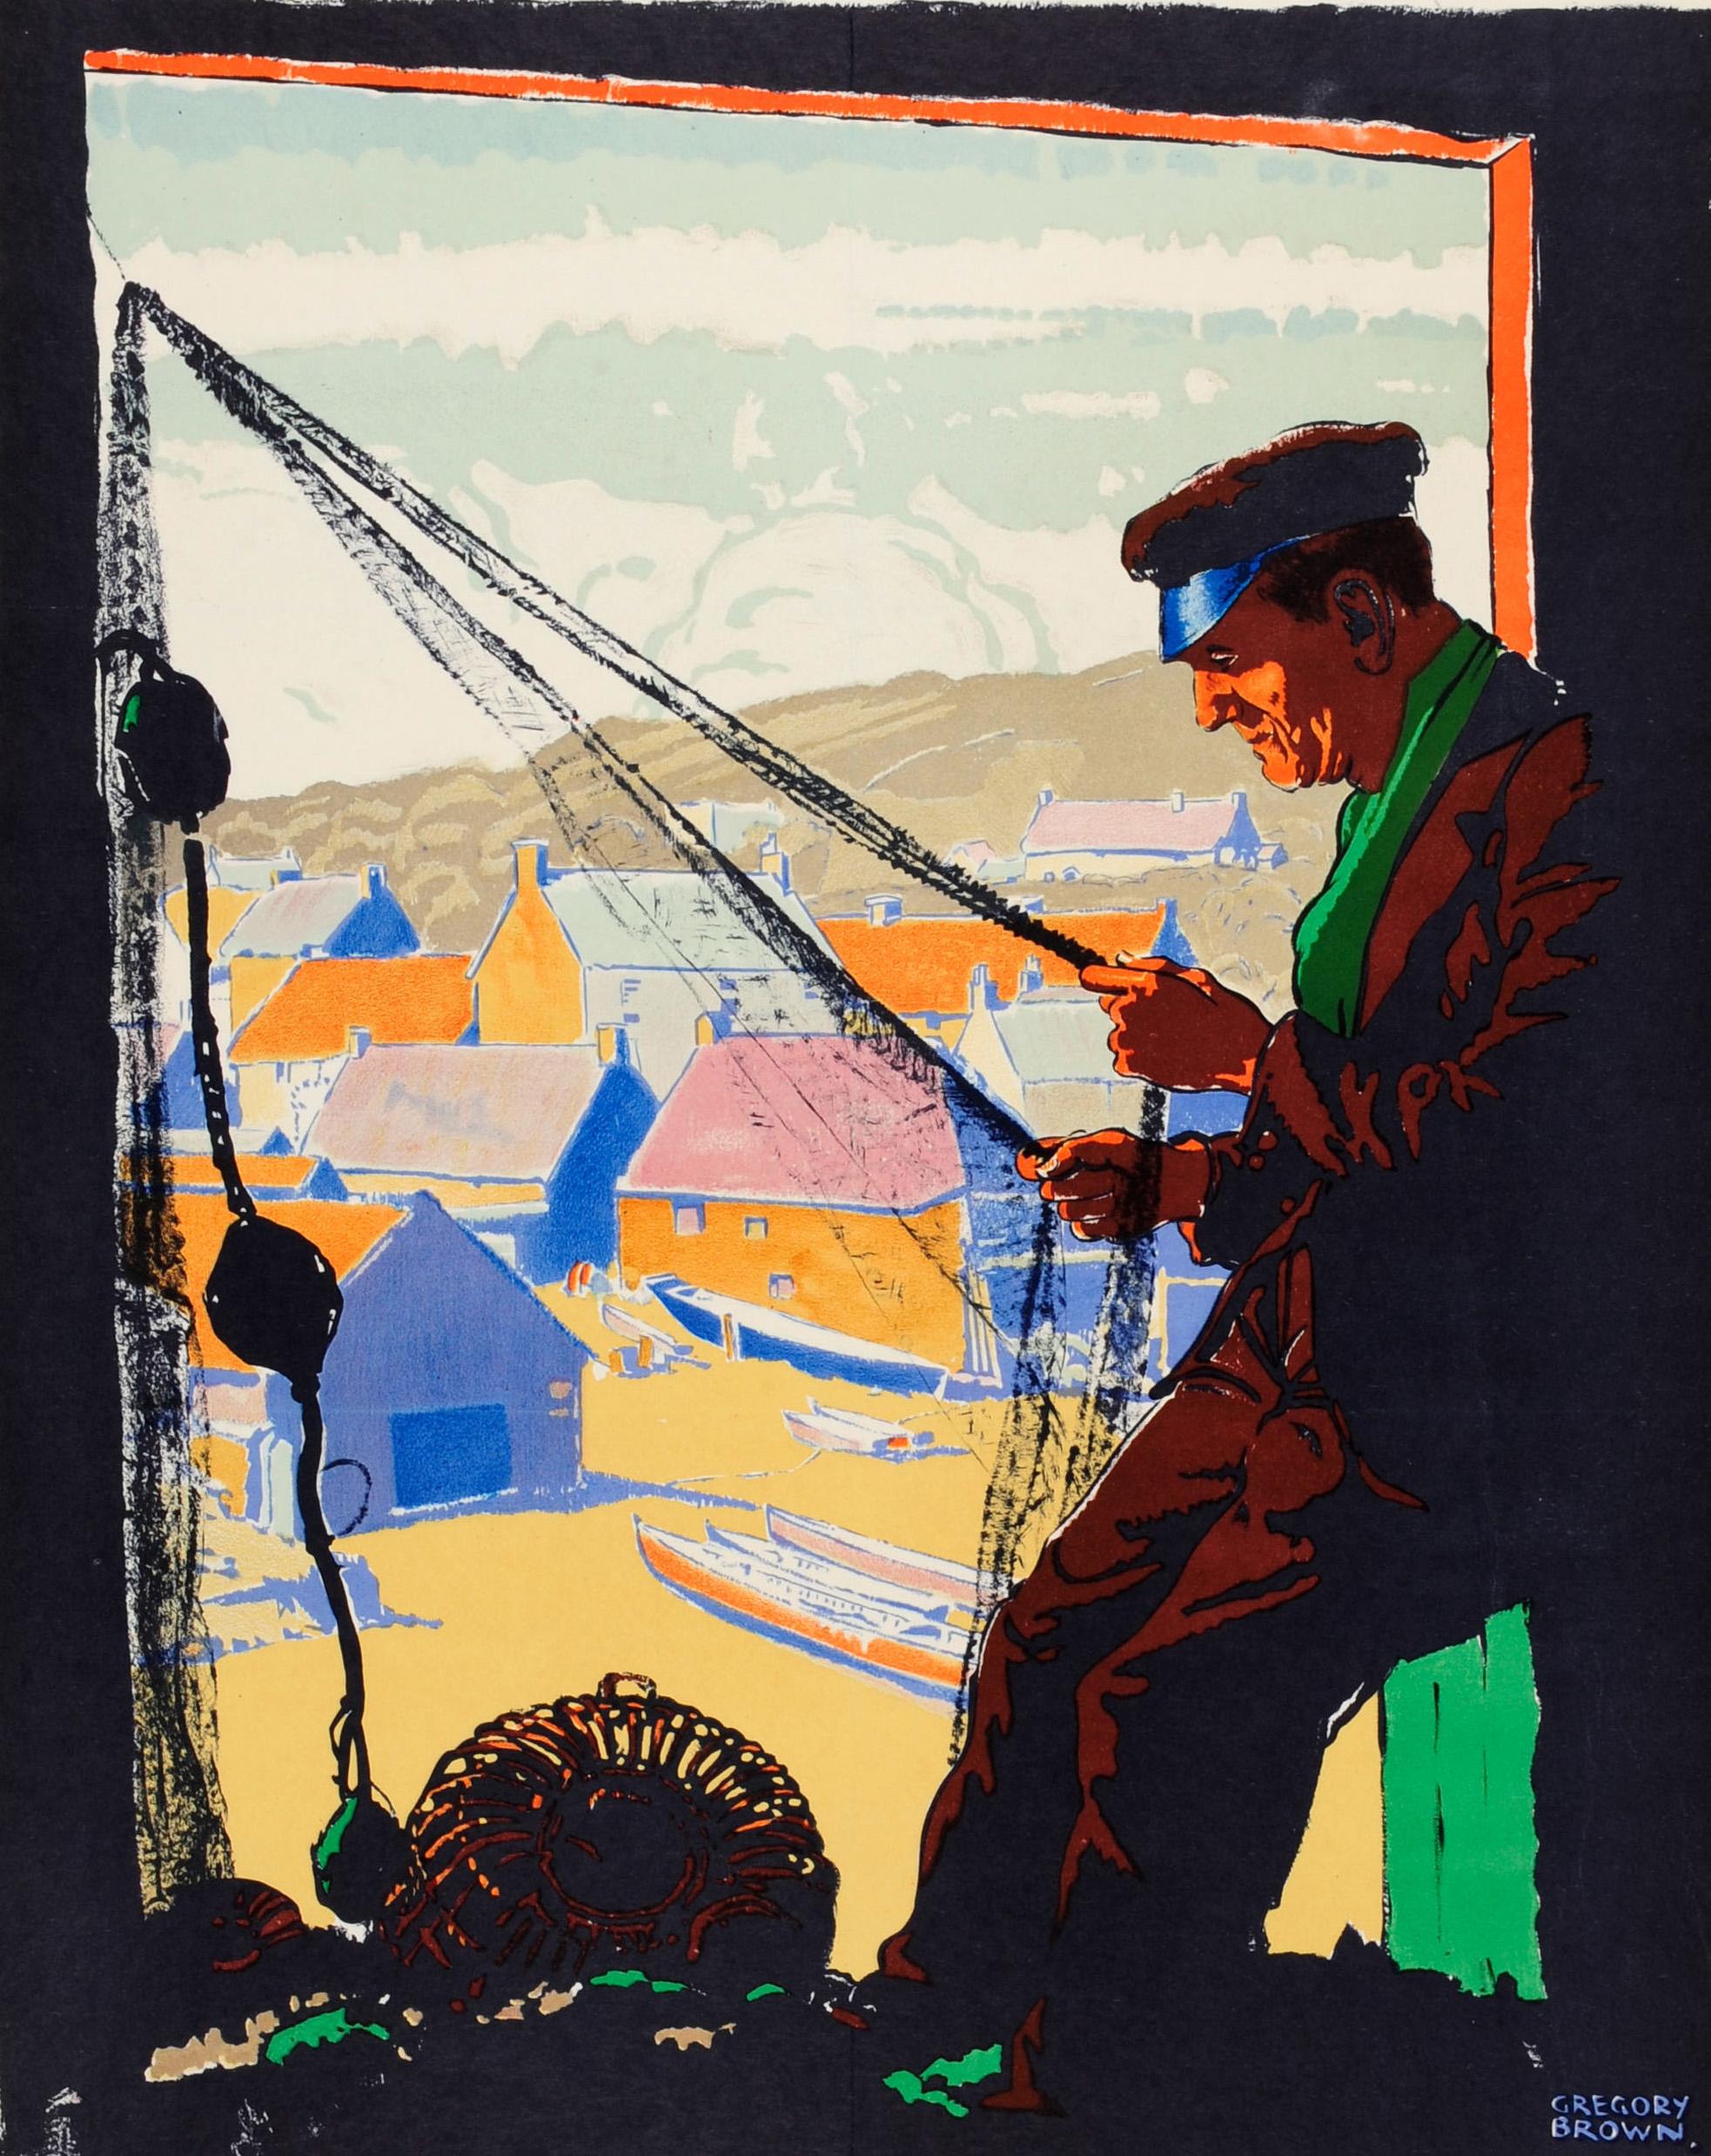 Original vintage GWR Great Western Railway travel advertising poster for Cornwall featuring a great illustration by the artist, metal worker and designer Gregory Brown (Frederic Gregory Brown; 1887-1941) of a man repairing a fishing net with